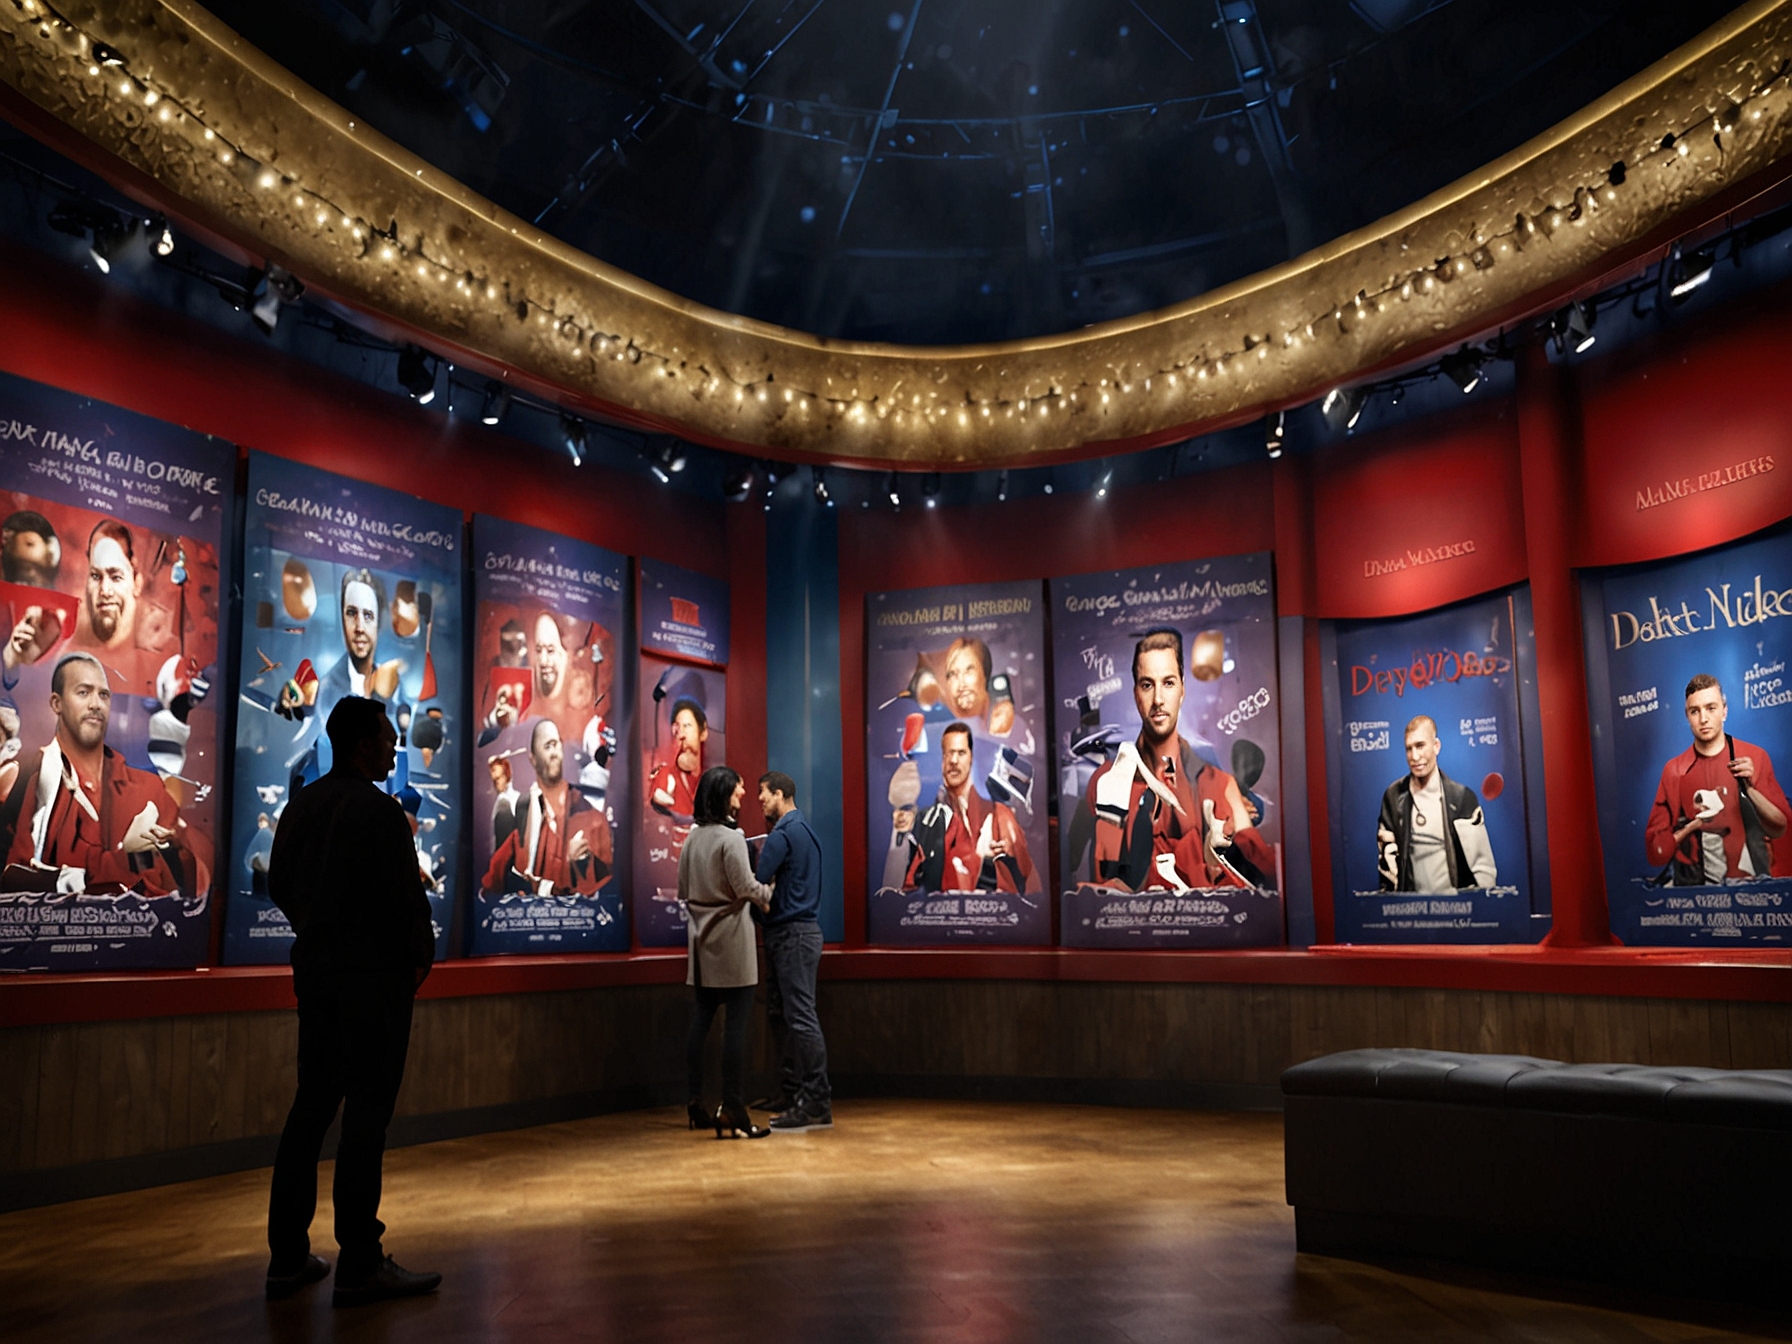 Visitors at Madame Tussauds New York's concert-themed floor marvel at the lifelike Drake wax figure, highlighting its detailed craftsmanship and realistic features.